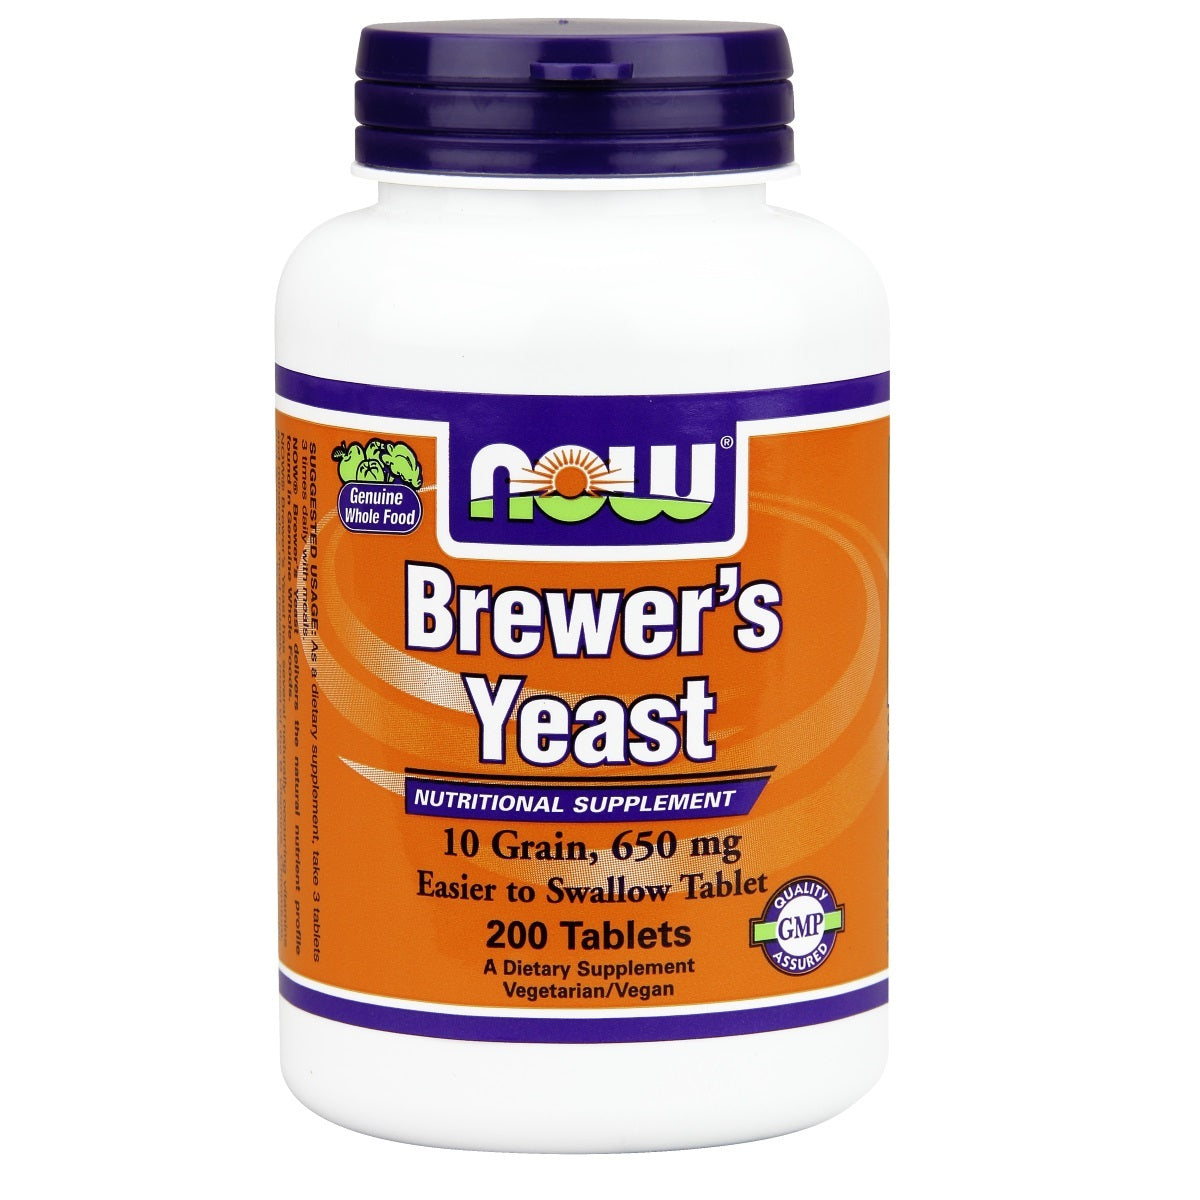 Primary image of Brewer's Yeast Tablets